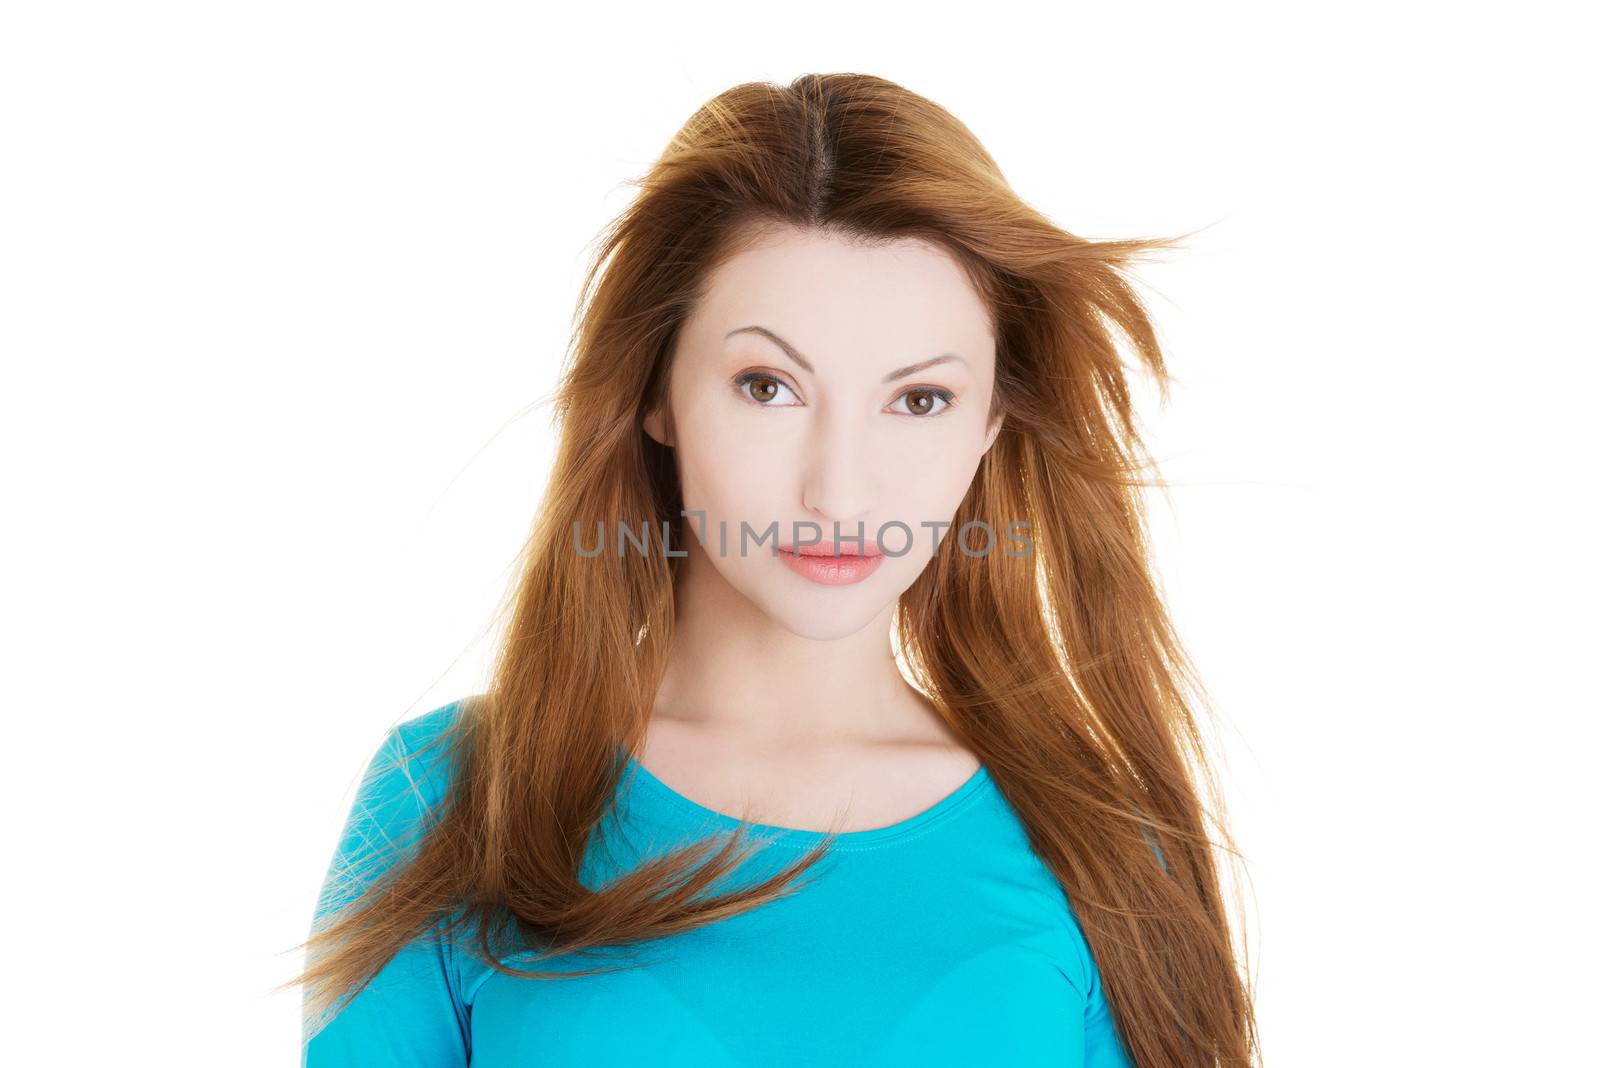 Portrait of happy adult woman over white background